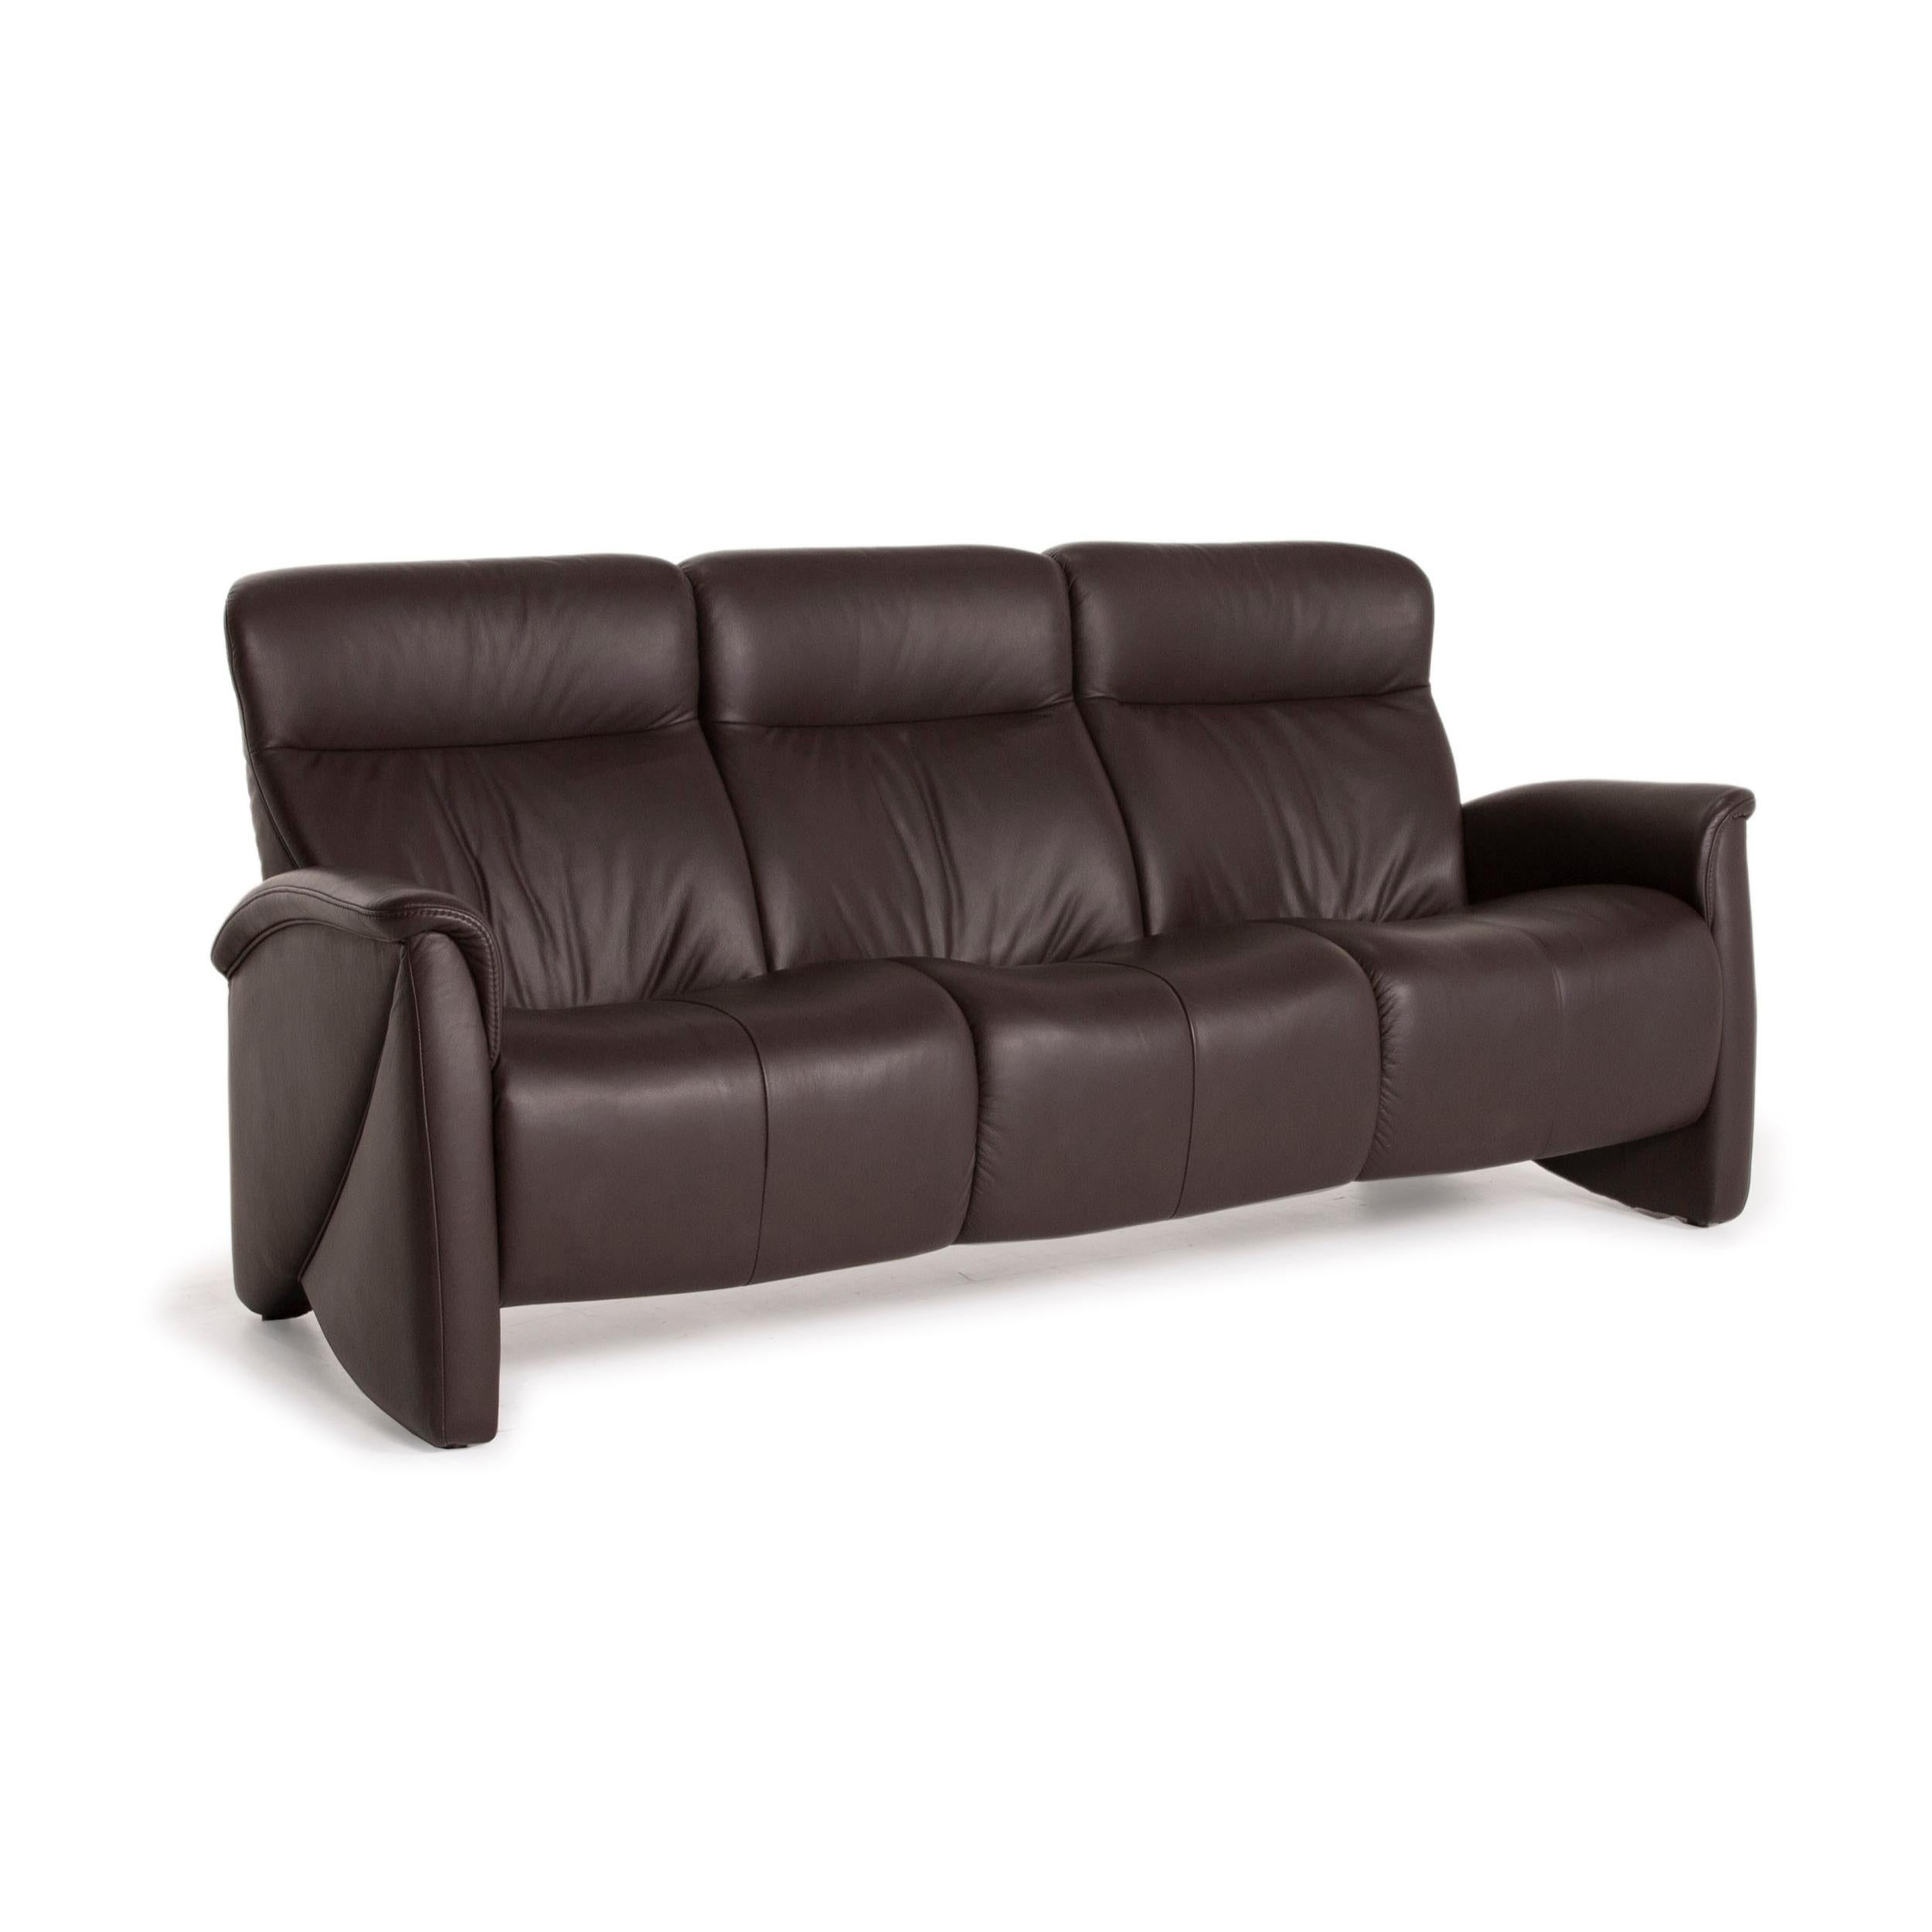 Contemporary Himolla Leather Sofa Brown Dark Brown Three-Seater Couch For Sale